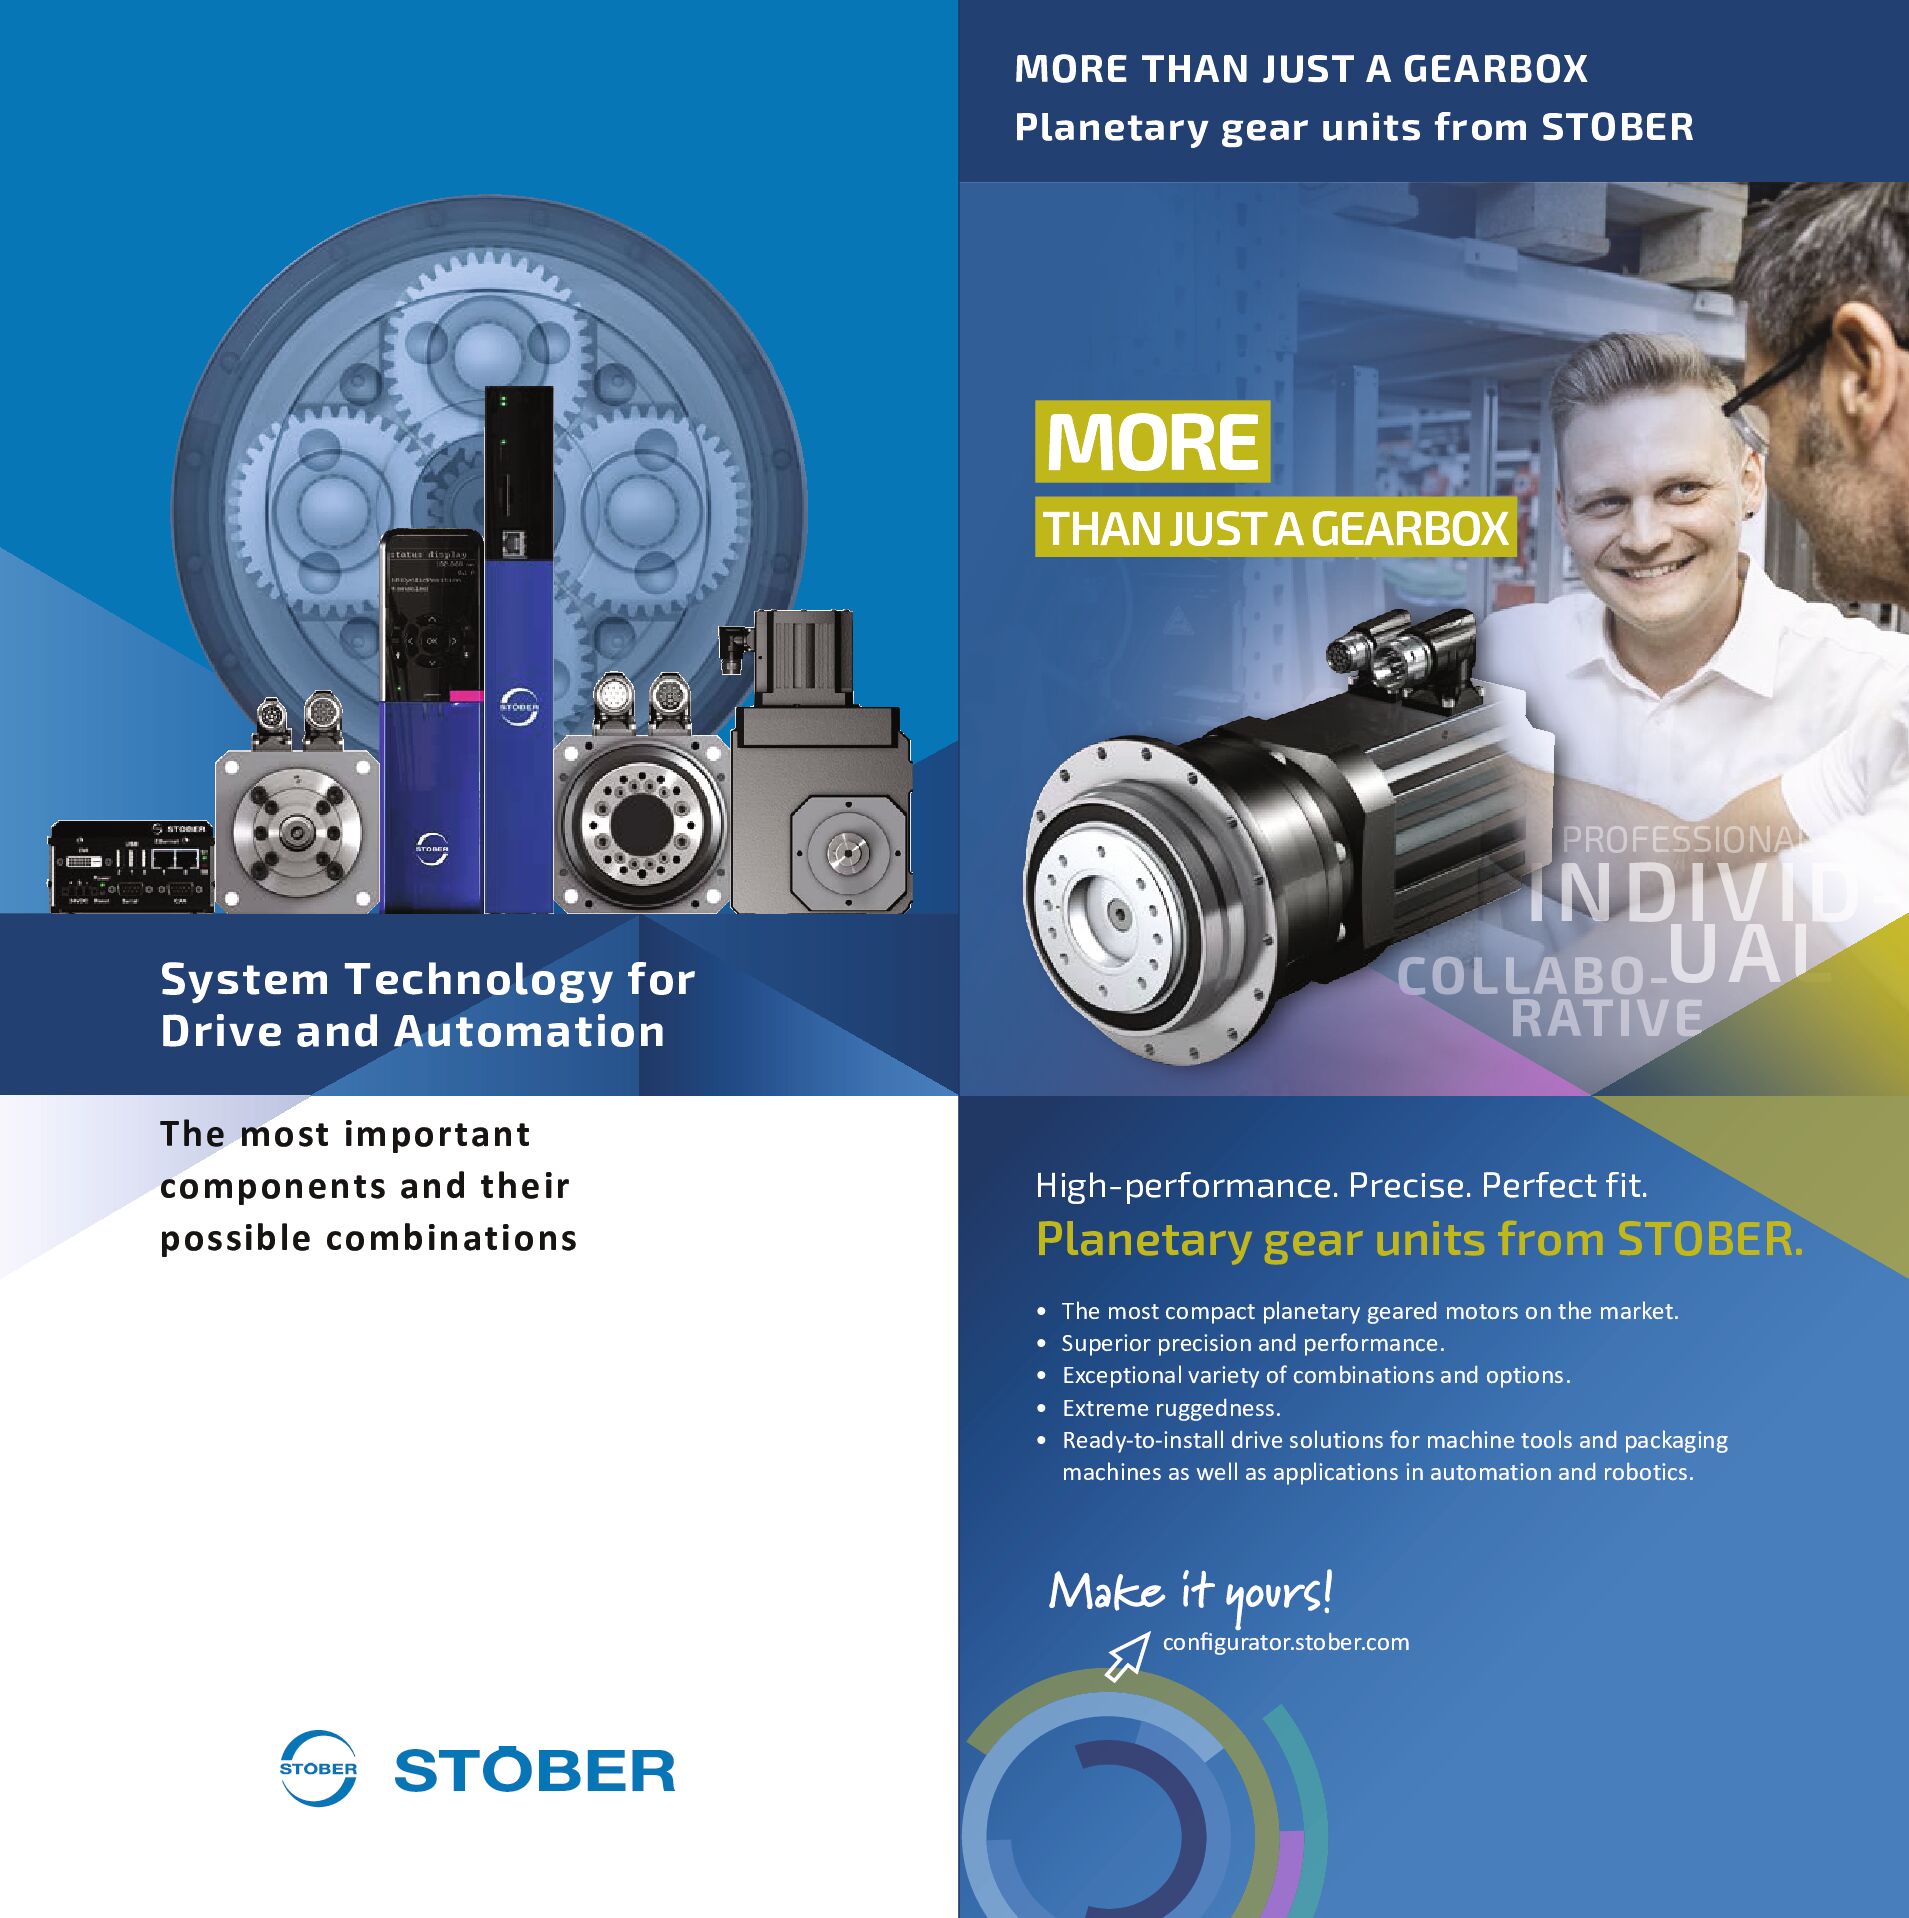 System Technology for Drive and Automation